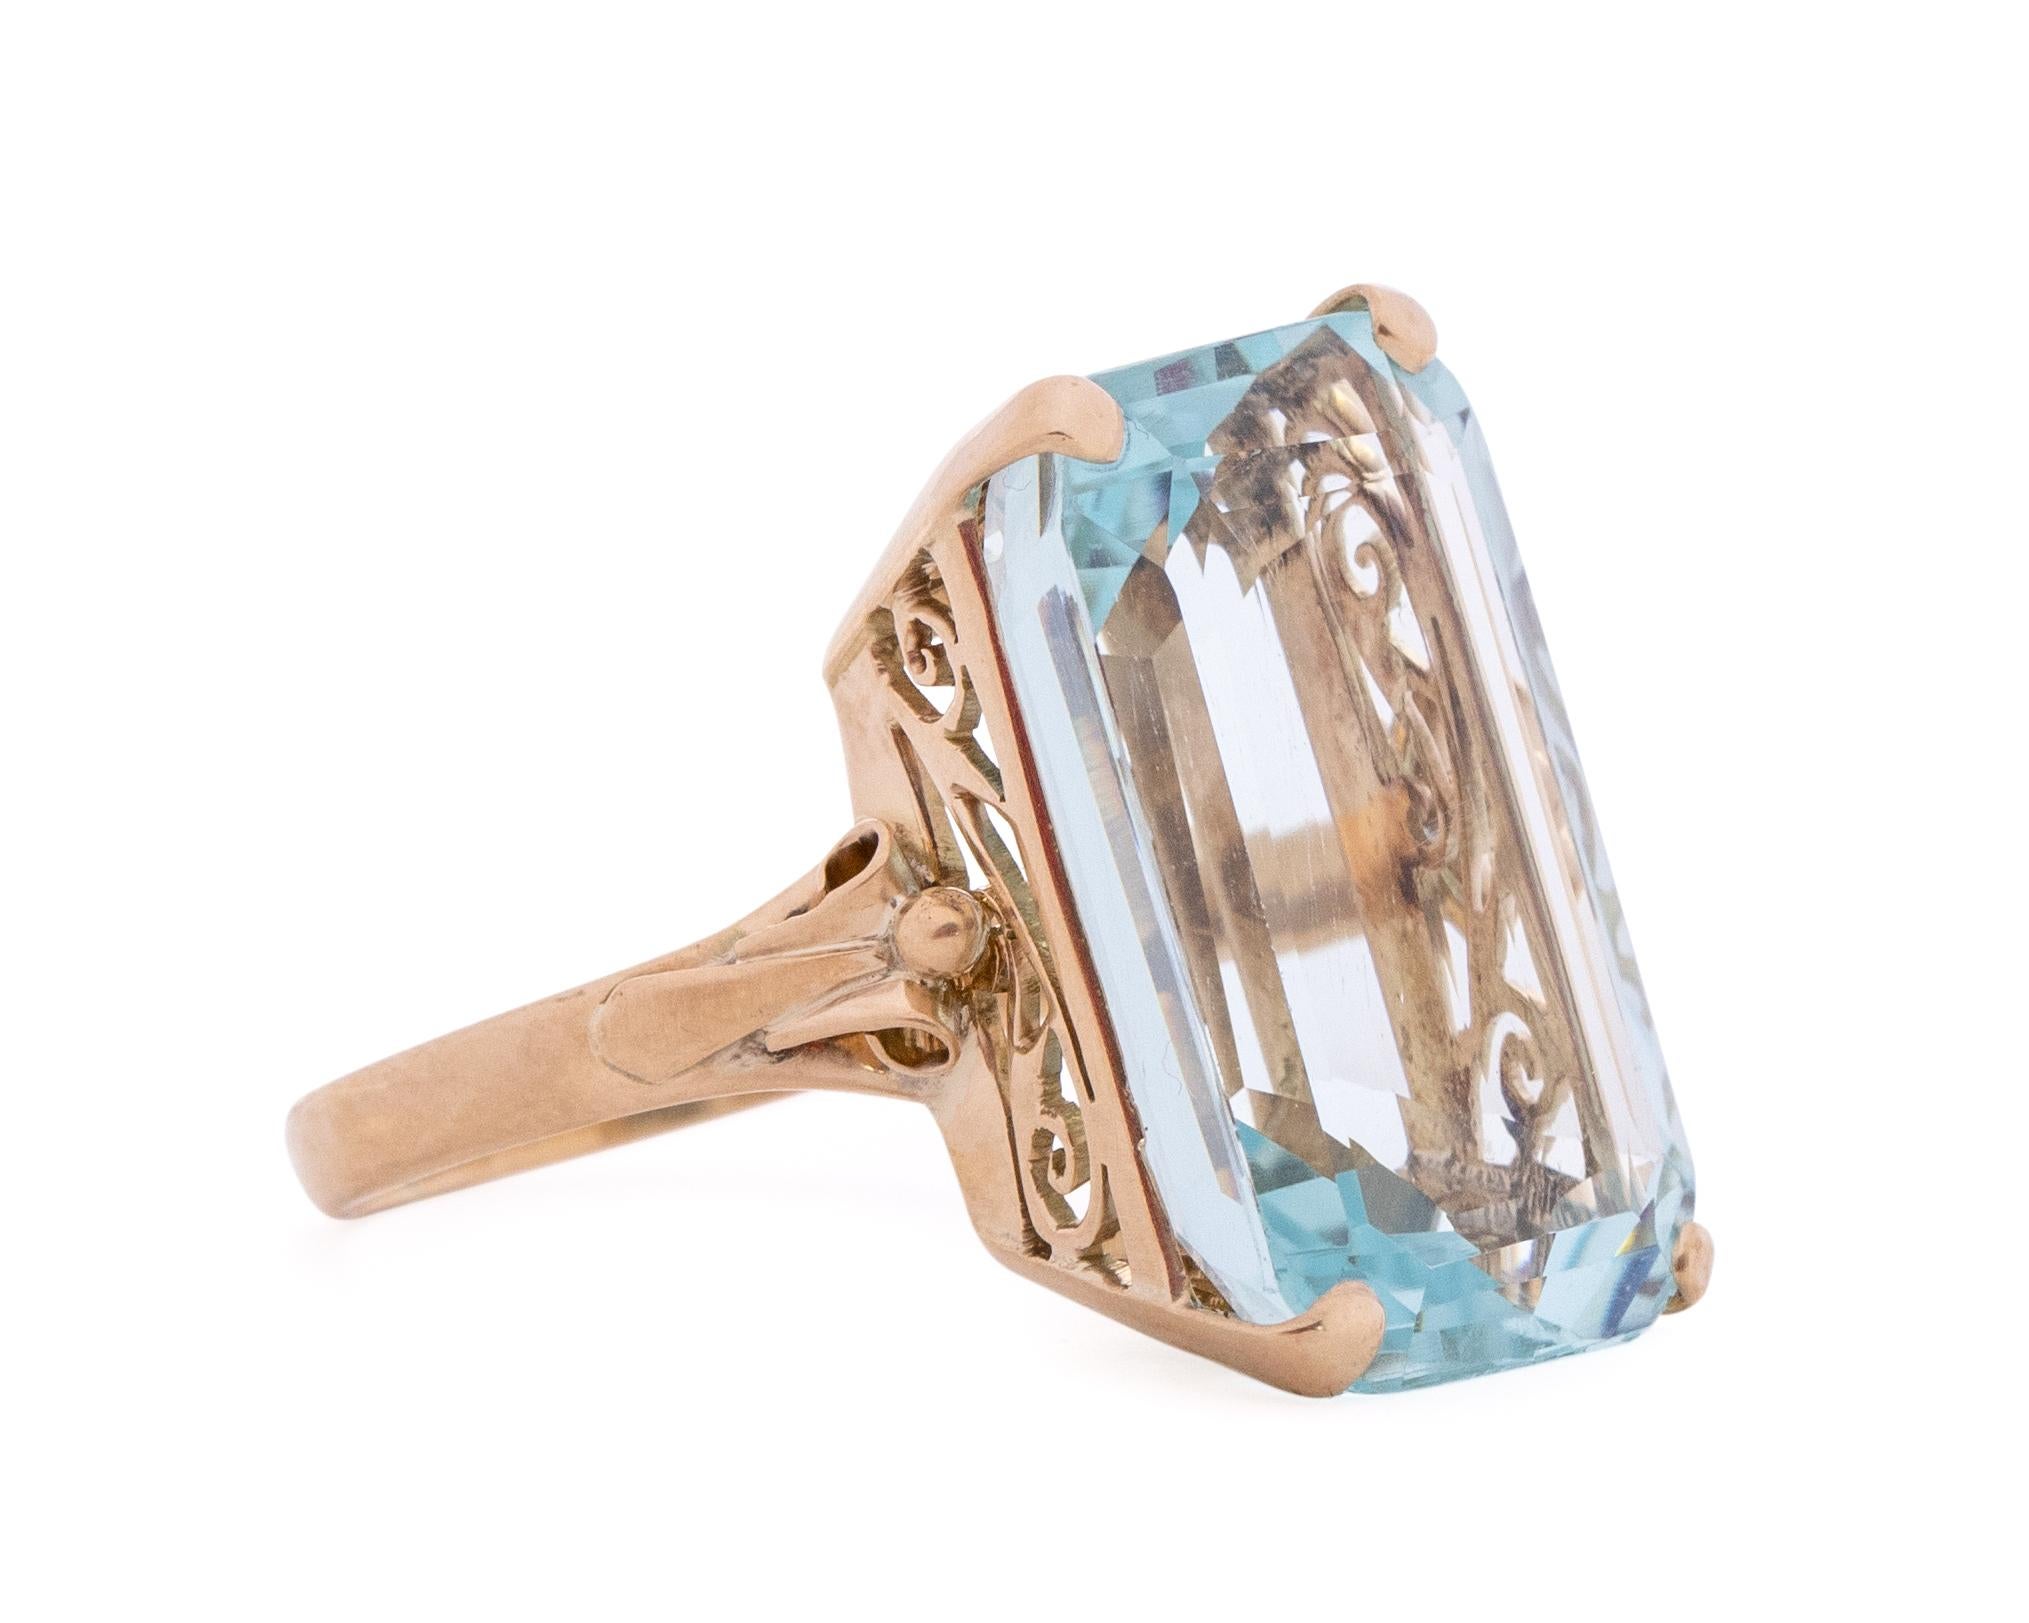 Item Details: 
Ring Size: 8
Metal Type: 14 Karat Yellow Gold [Hallmarked, and Tested]
Weight: 7 grams

Center Gem Details:
Weight: 17.16 Carat
Cut: Elongated Radiant
Color: Sky Blue
Clarity: VS

Finger to Top of Stone Measurement: 10 mm
Condition: